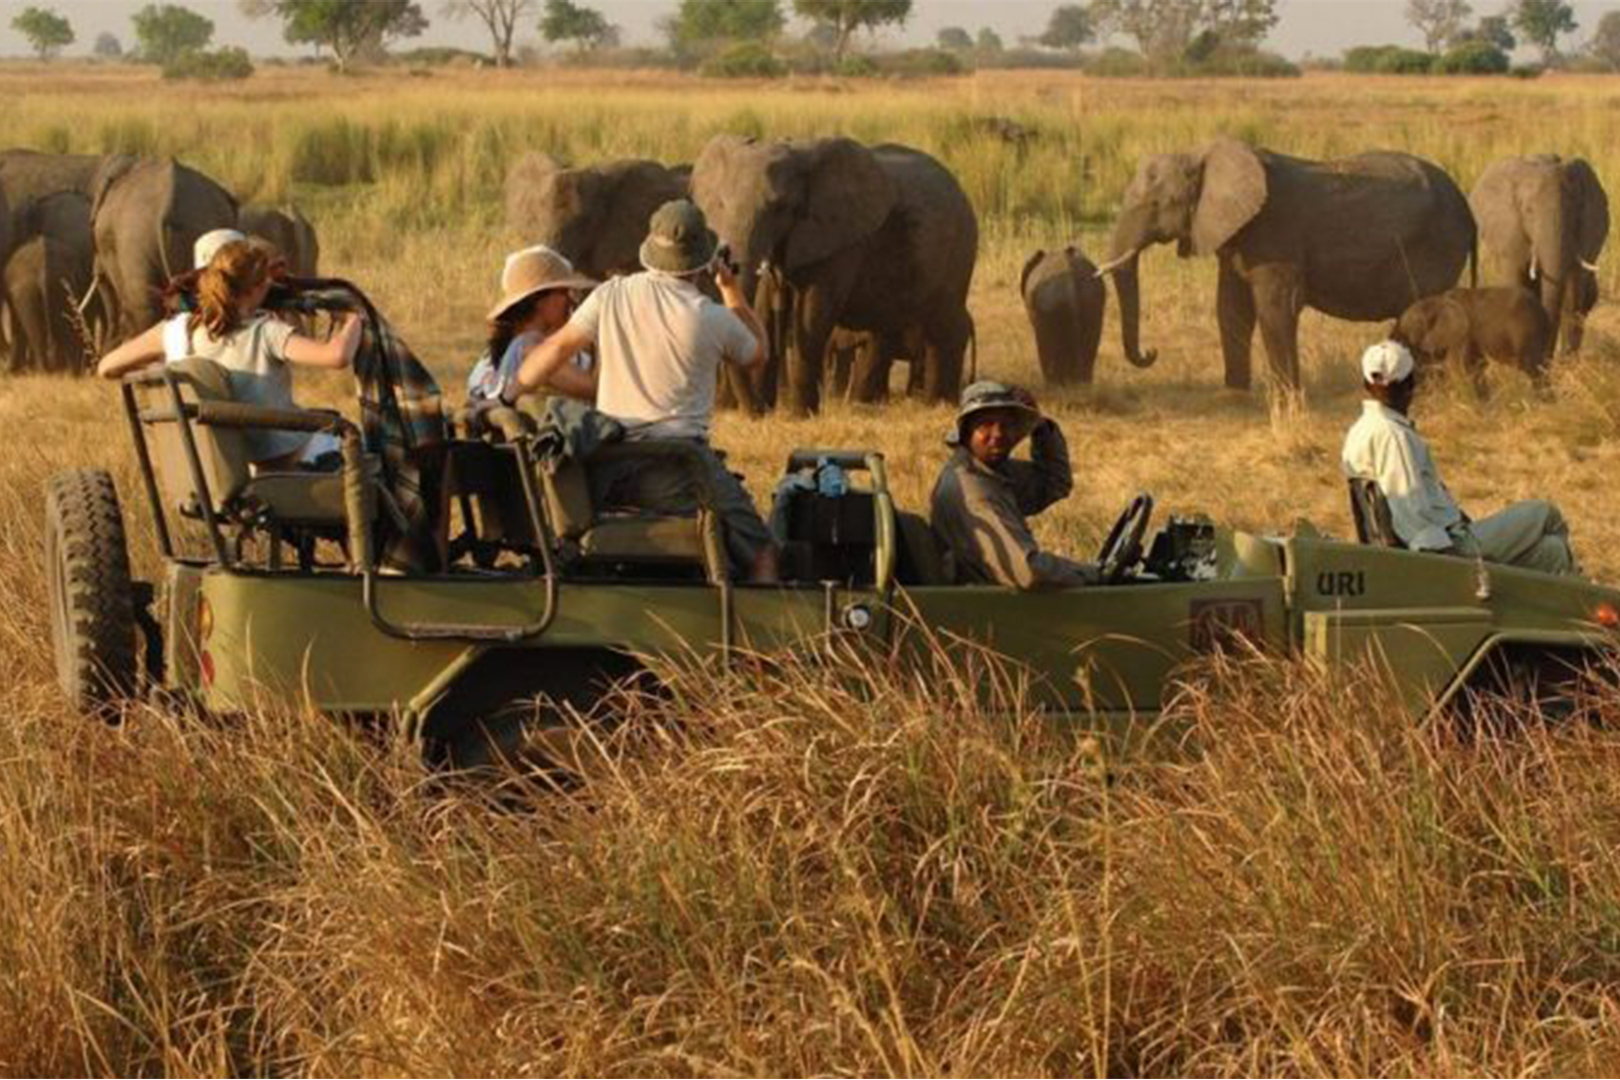 Planning A Perfect Safari Trip To Kidepo Valley National Park